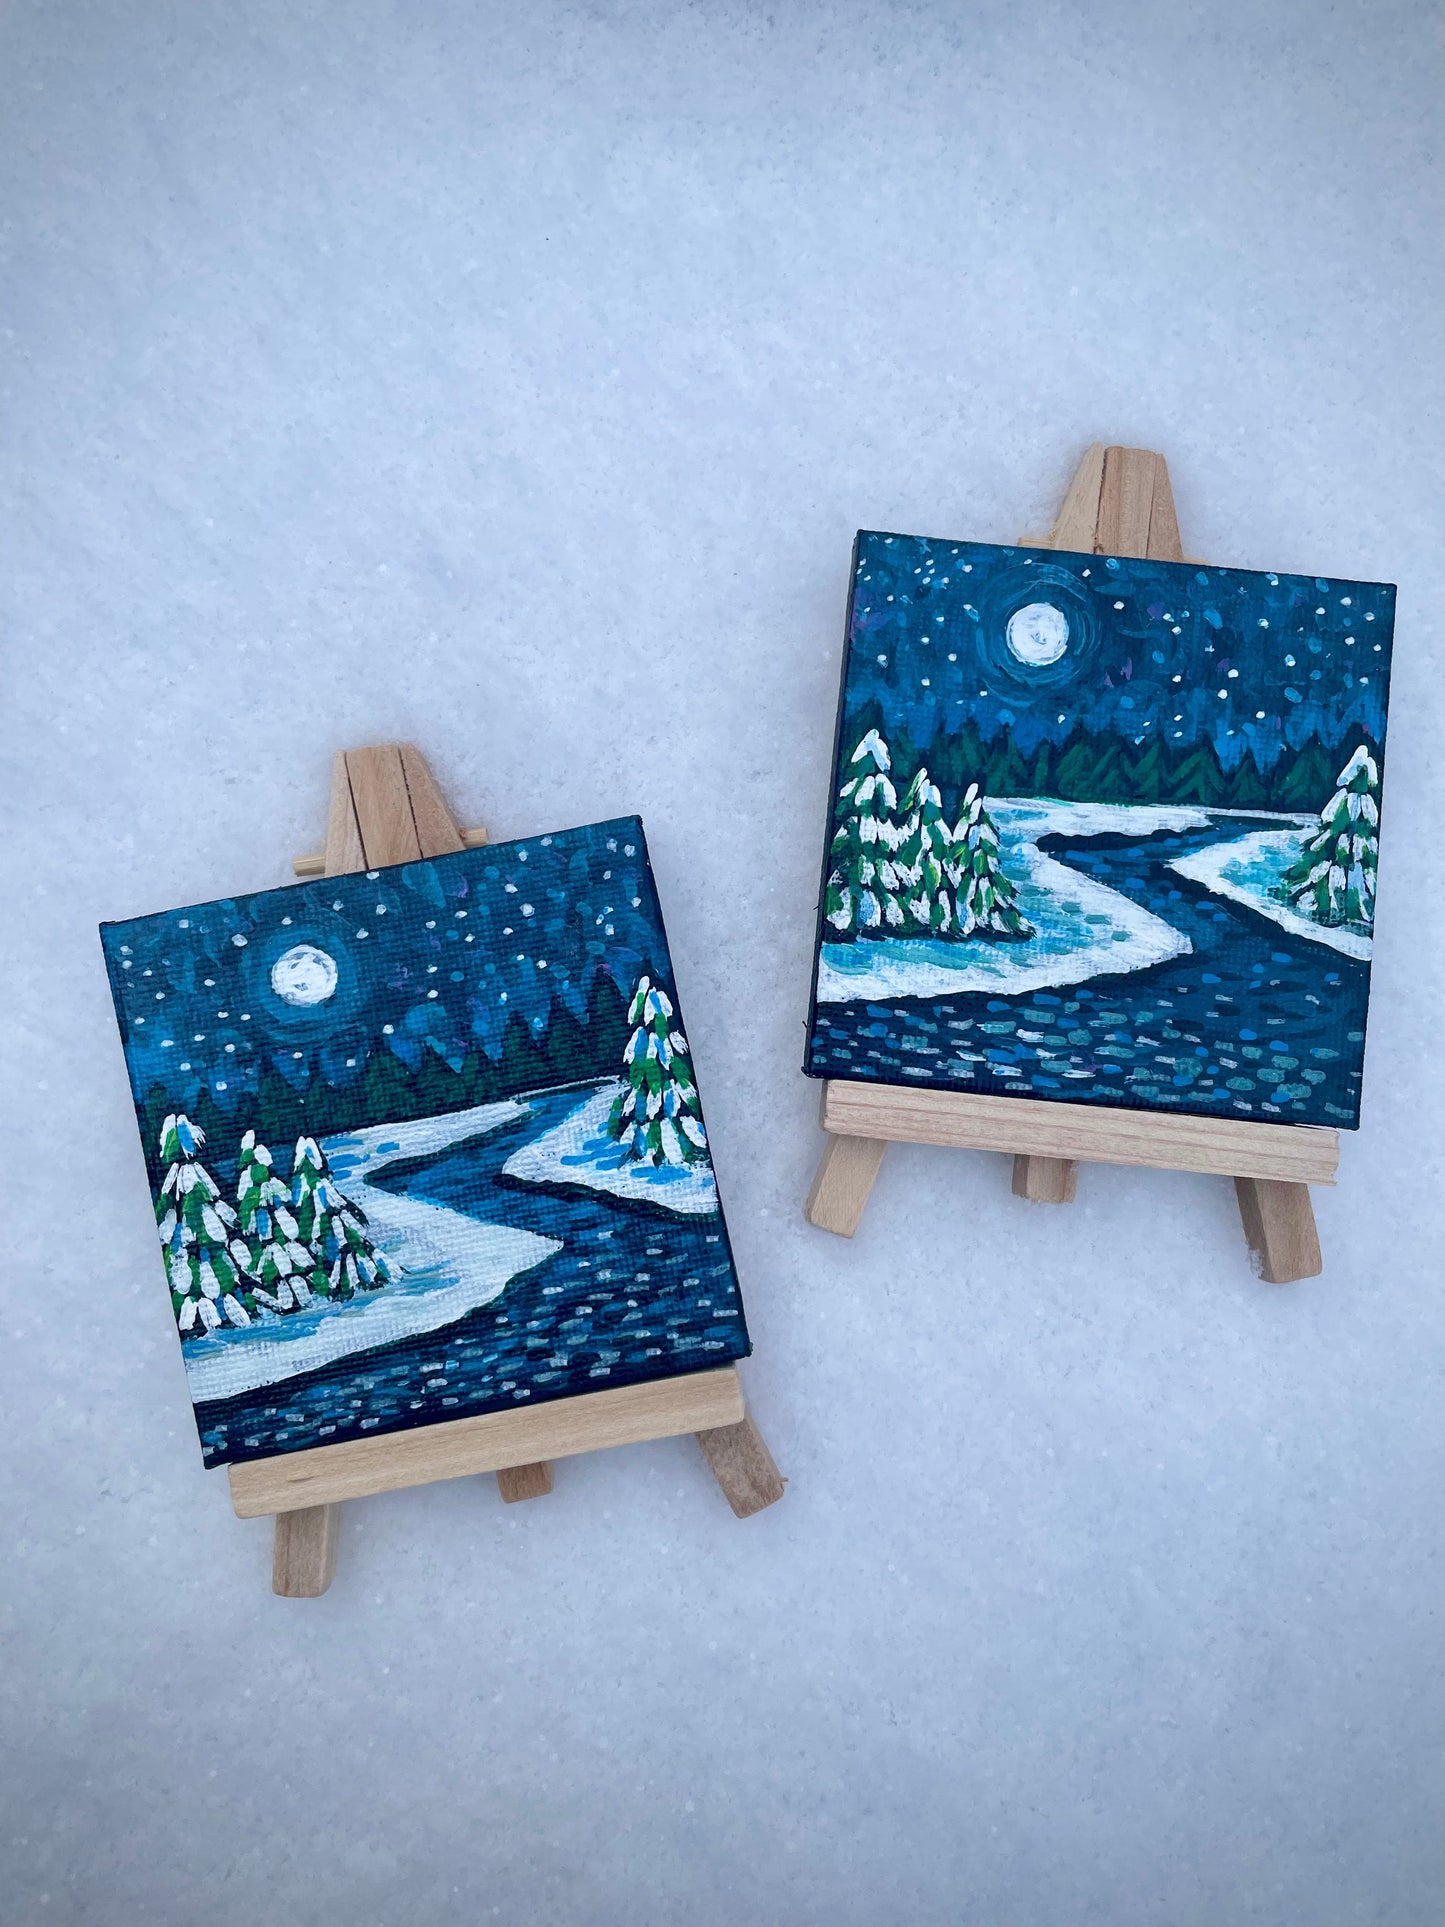 MINI PAINTING with Wood Easel: WINTER MARSH STREAM